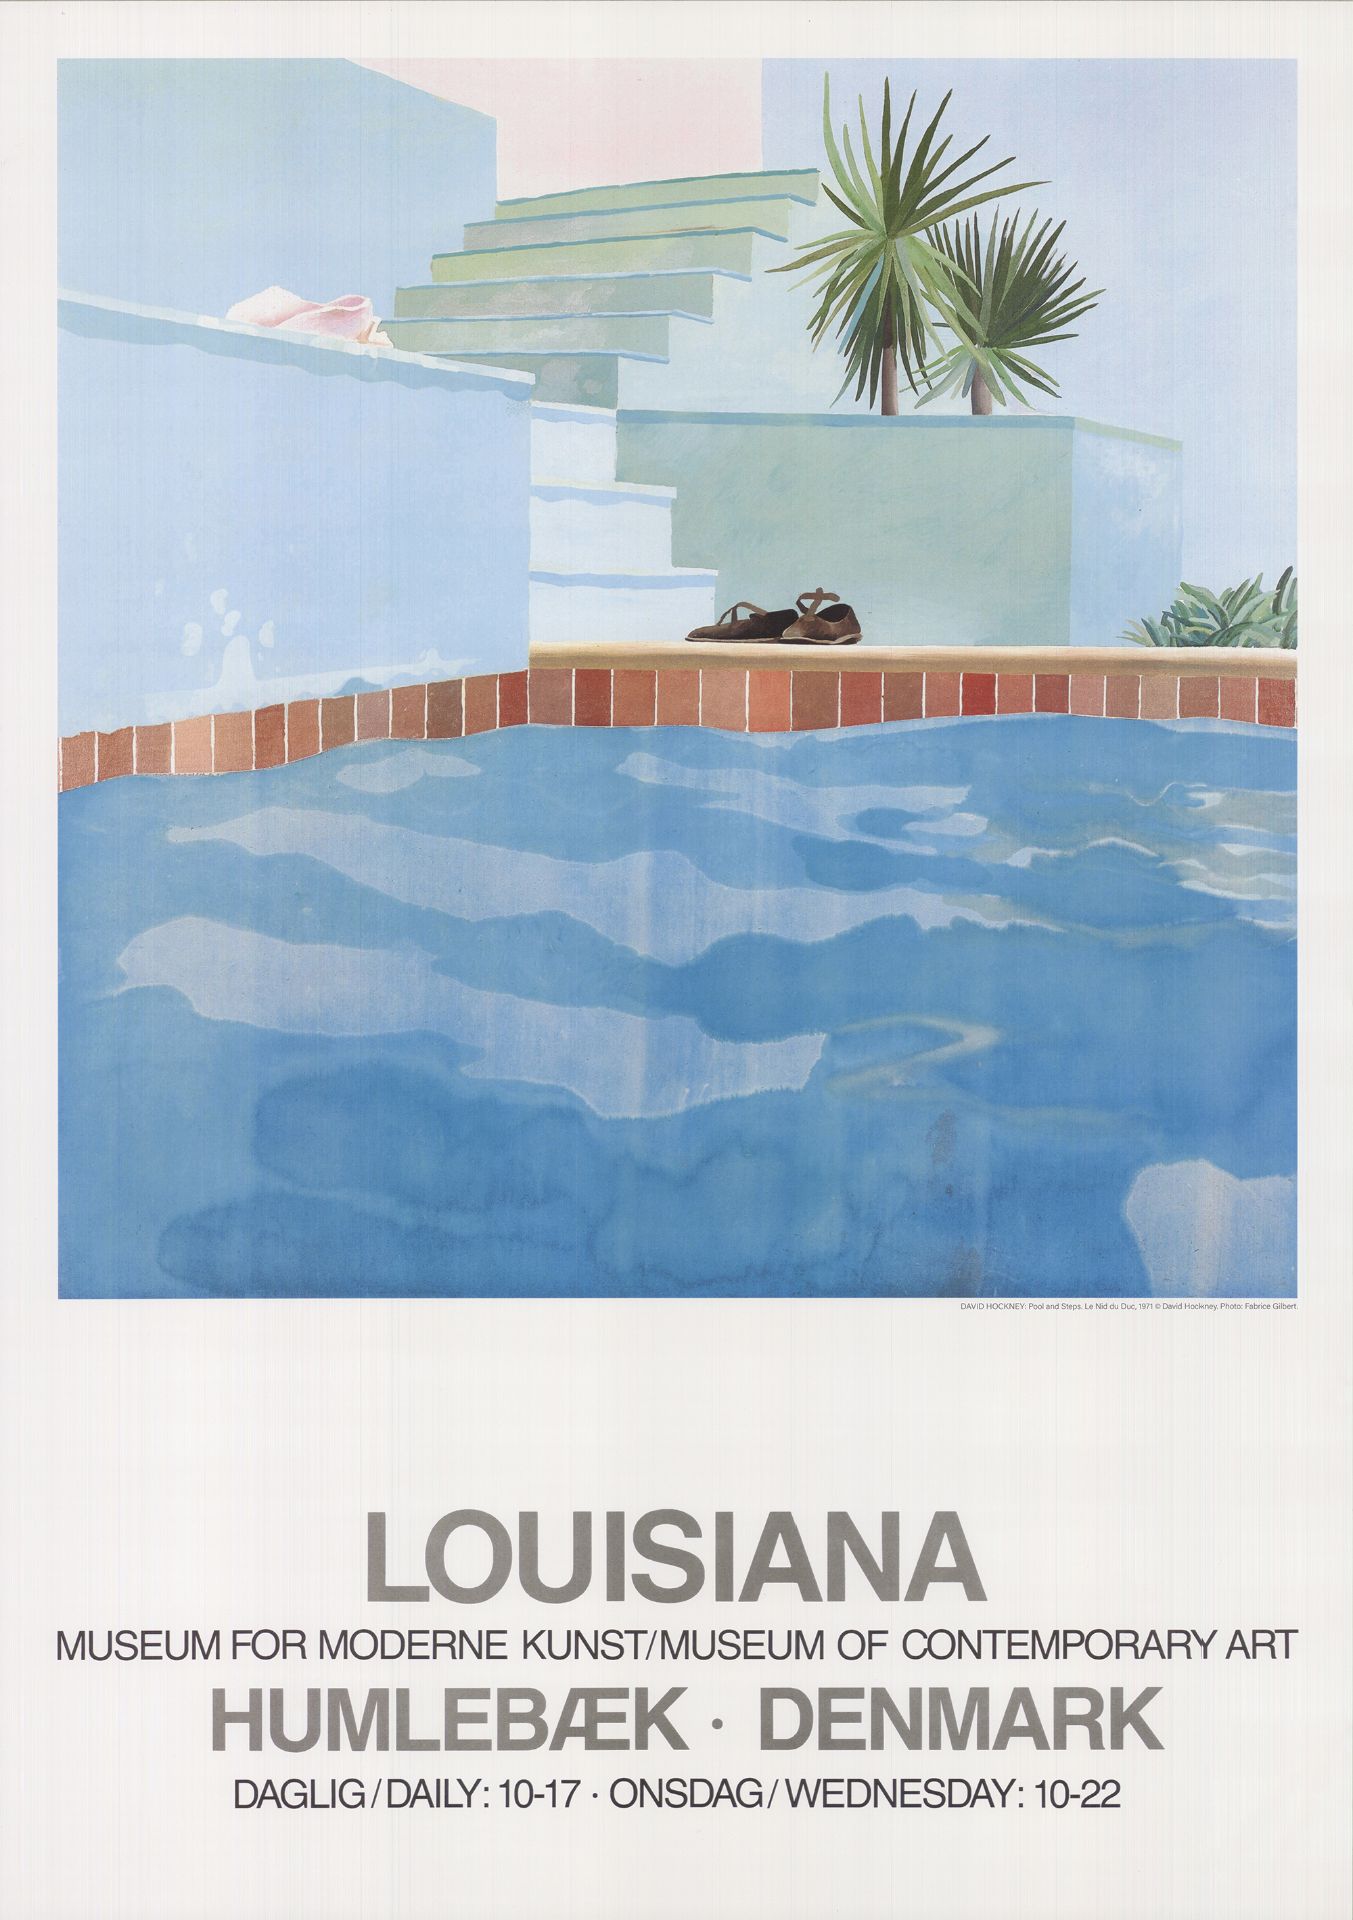 DAVID HOCKNEY - POOL AND STEPS - LIMITED EDITION PRINT POSTER